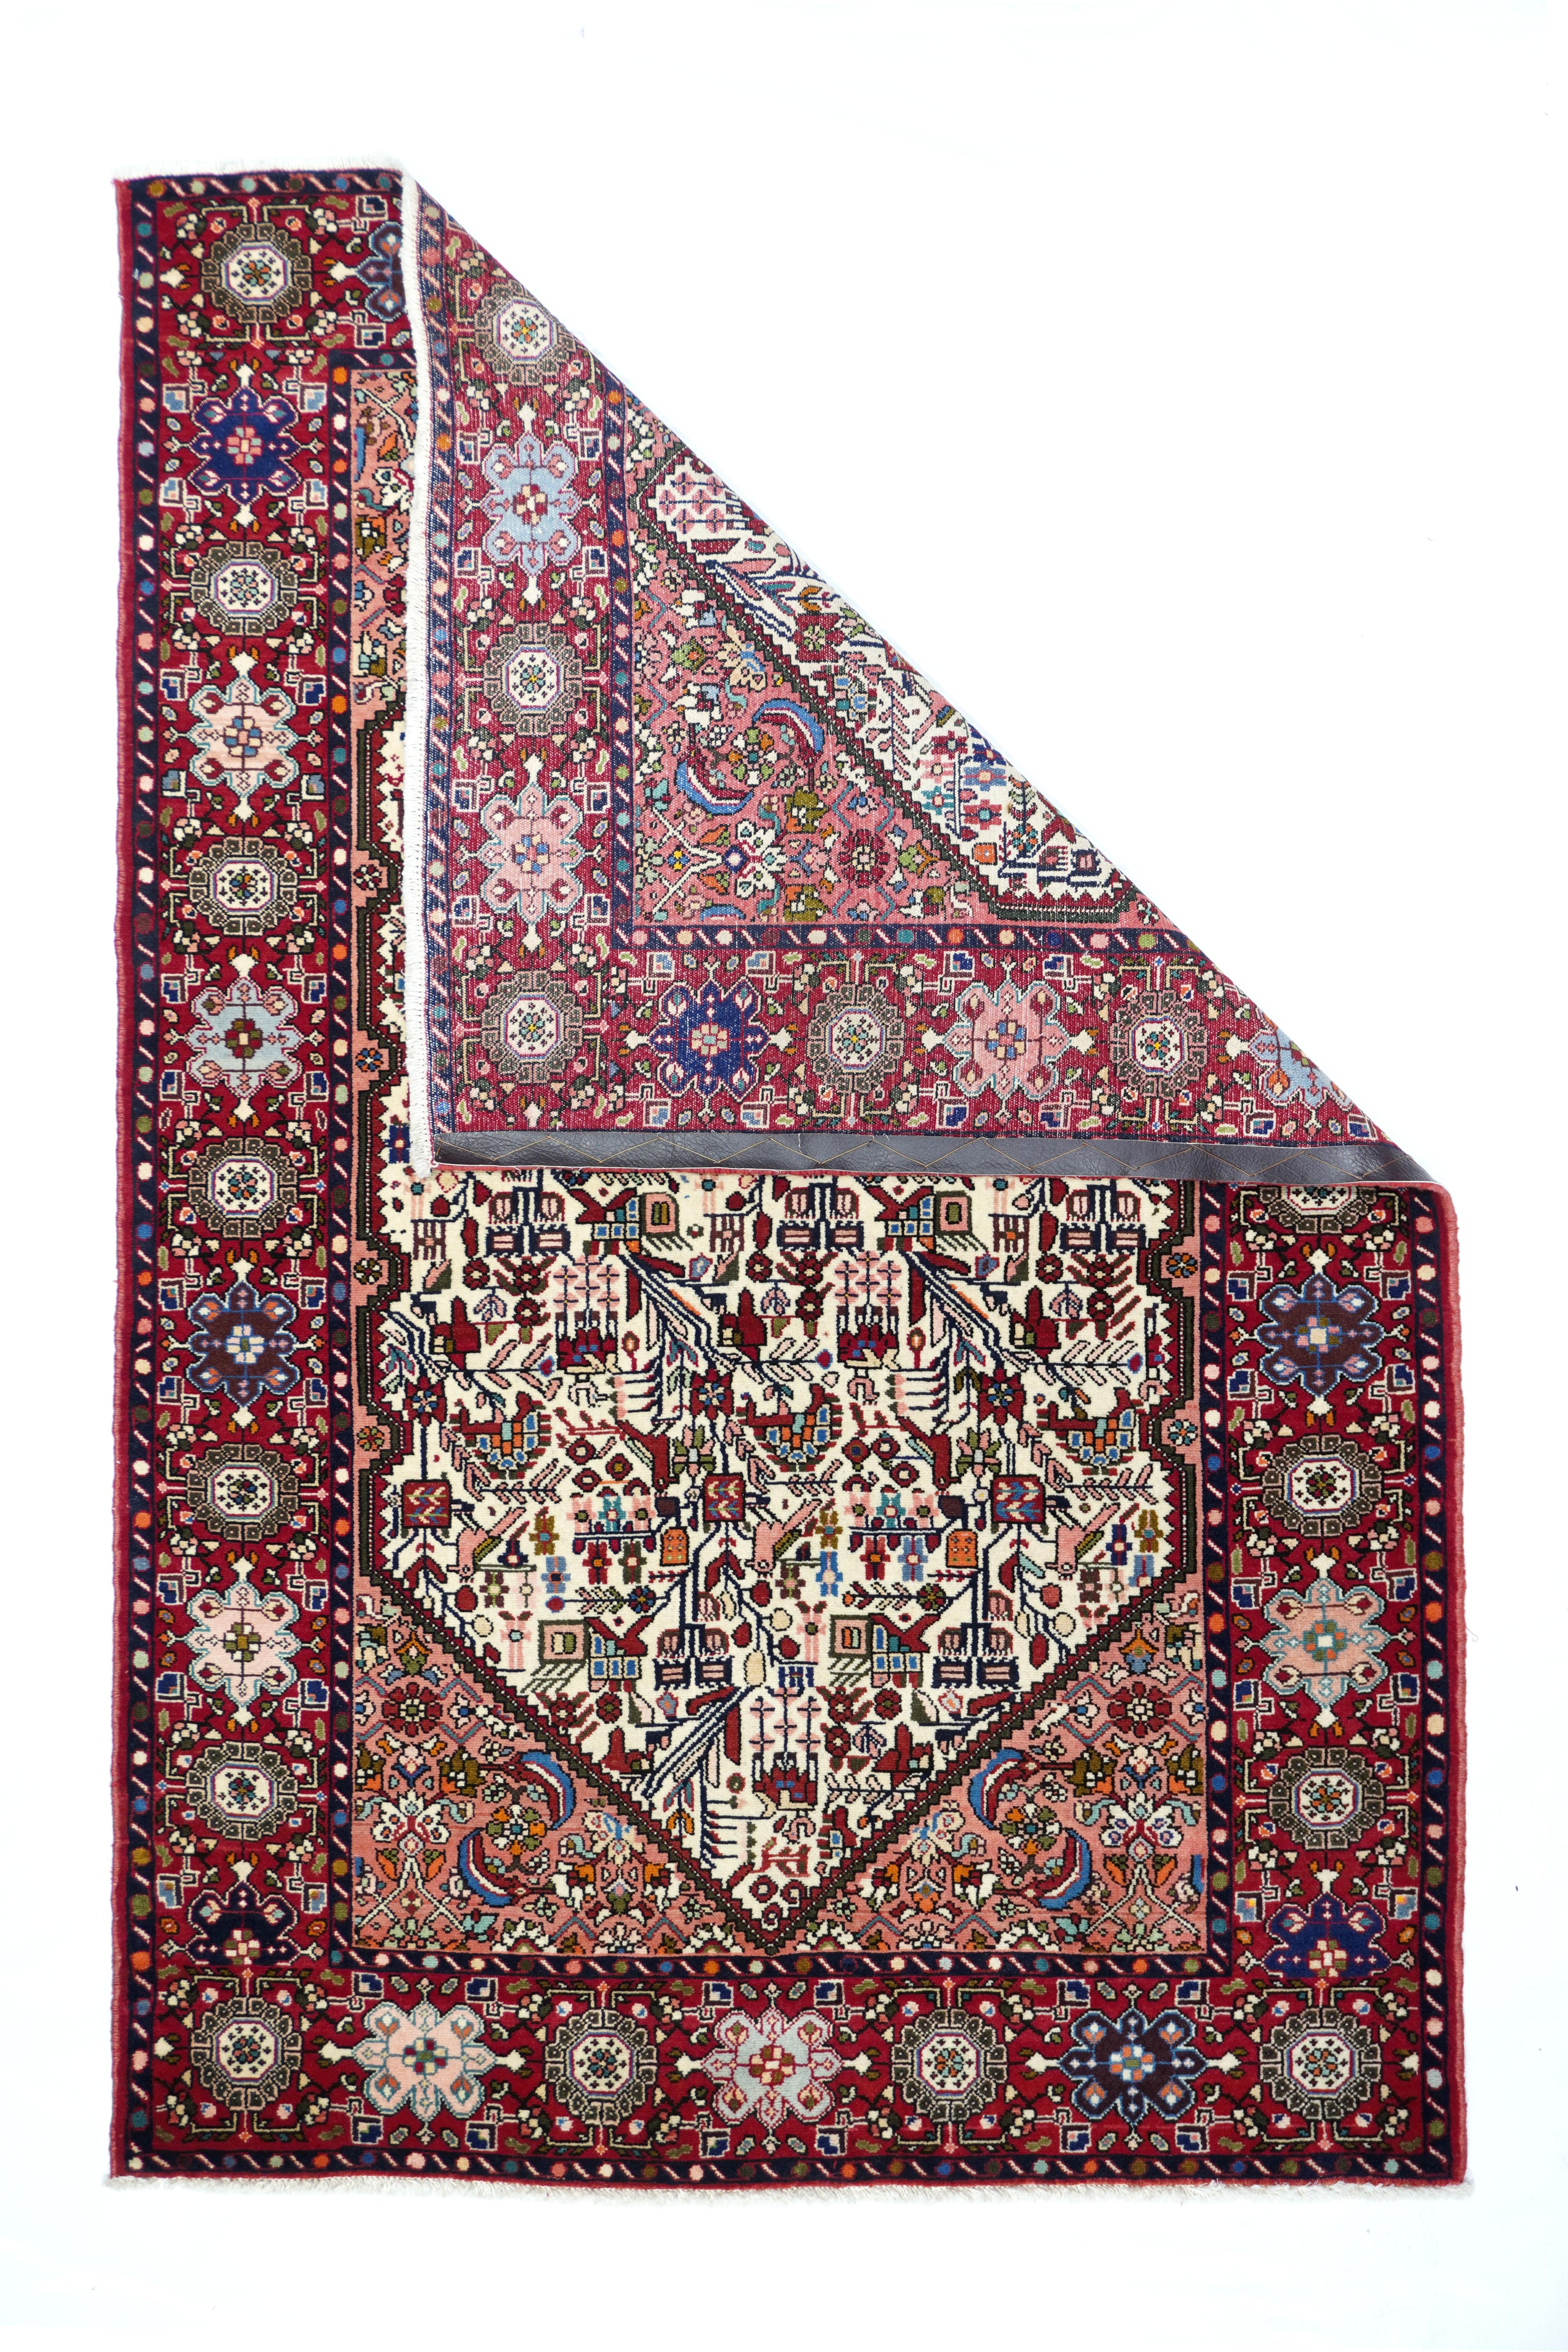 Vintage Quashkai rug 4'3'' x 6'5''. The indented pointed ivory hexagonal subfield displays leaves, flowers and oblique vines in a semi-geometric manner on this well-woven asymmetrically knotted, cotton foundation scatter. The light rose ground shows